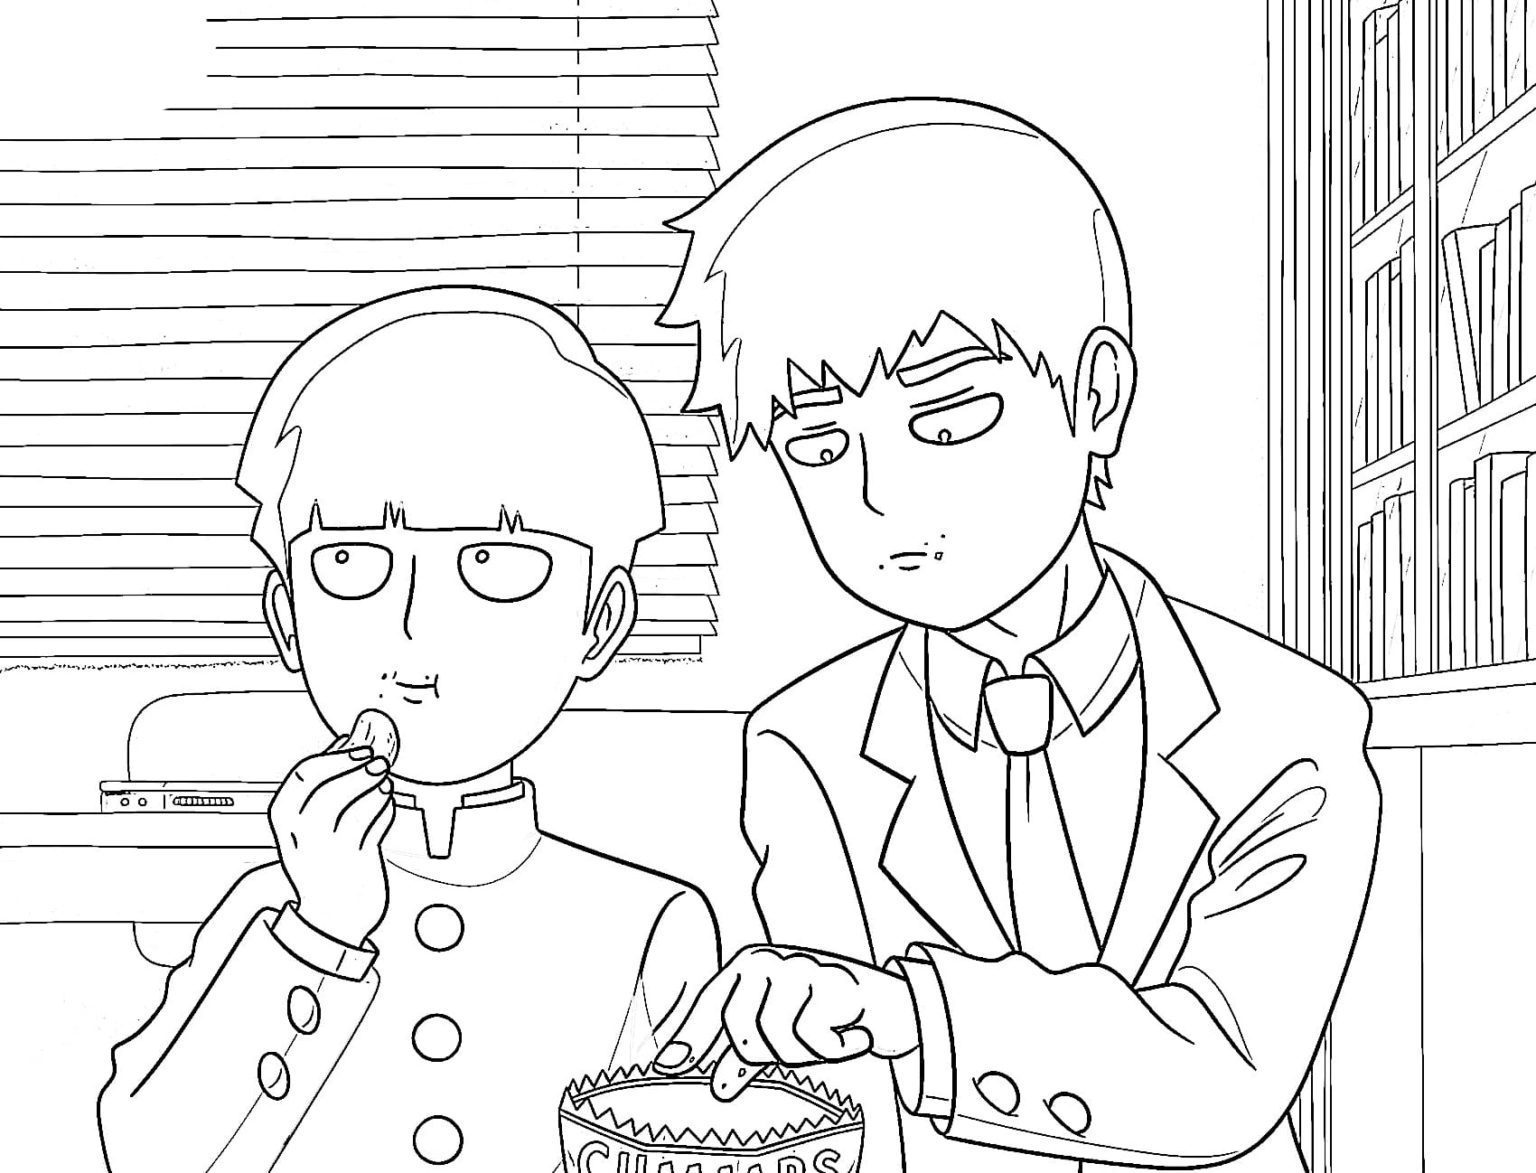 Mob and Arataka Reigen Coloring Pages